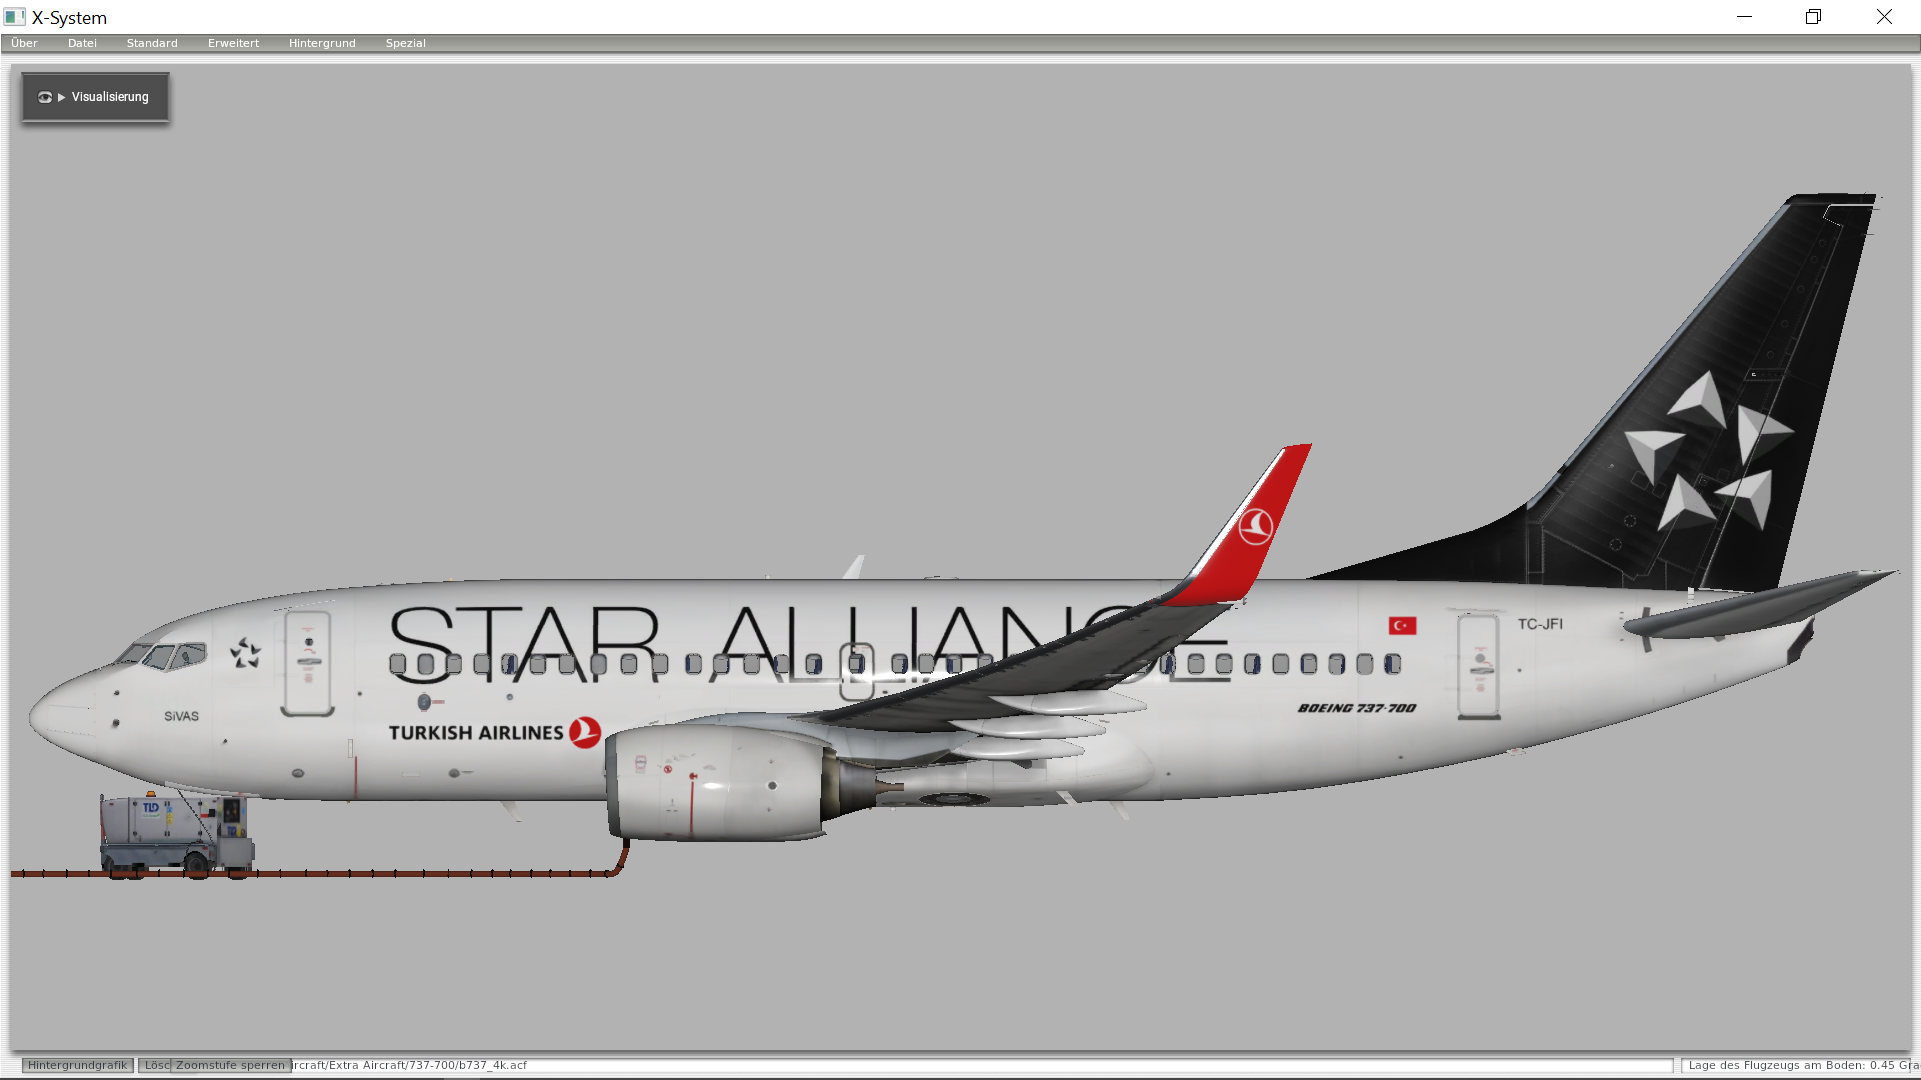 More information about "Star Alliance - Turkish Airlines"